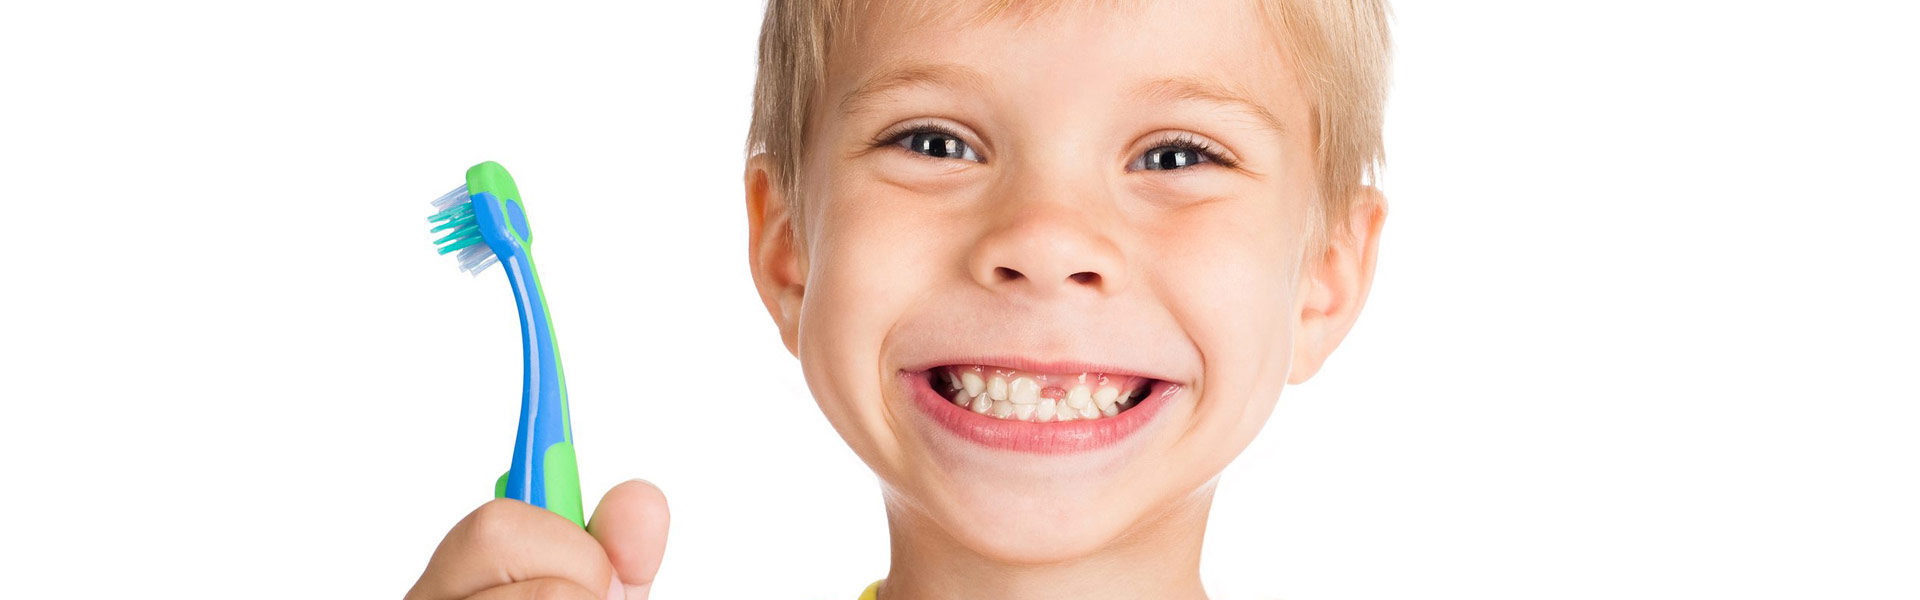 The Importance of Pediatric Dental Care